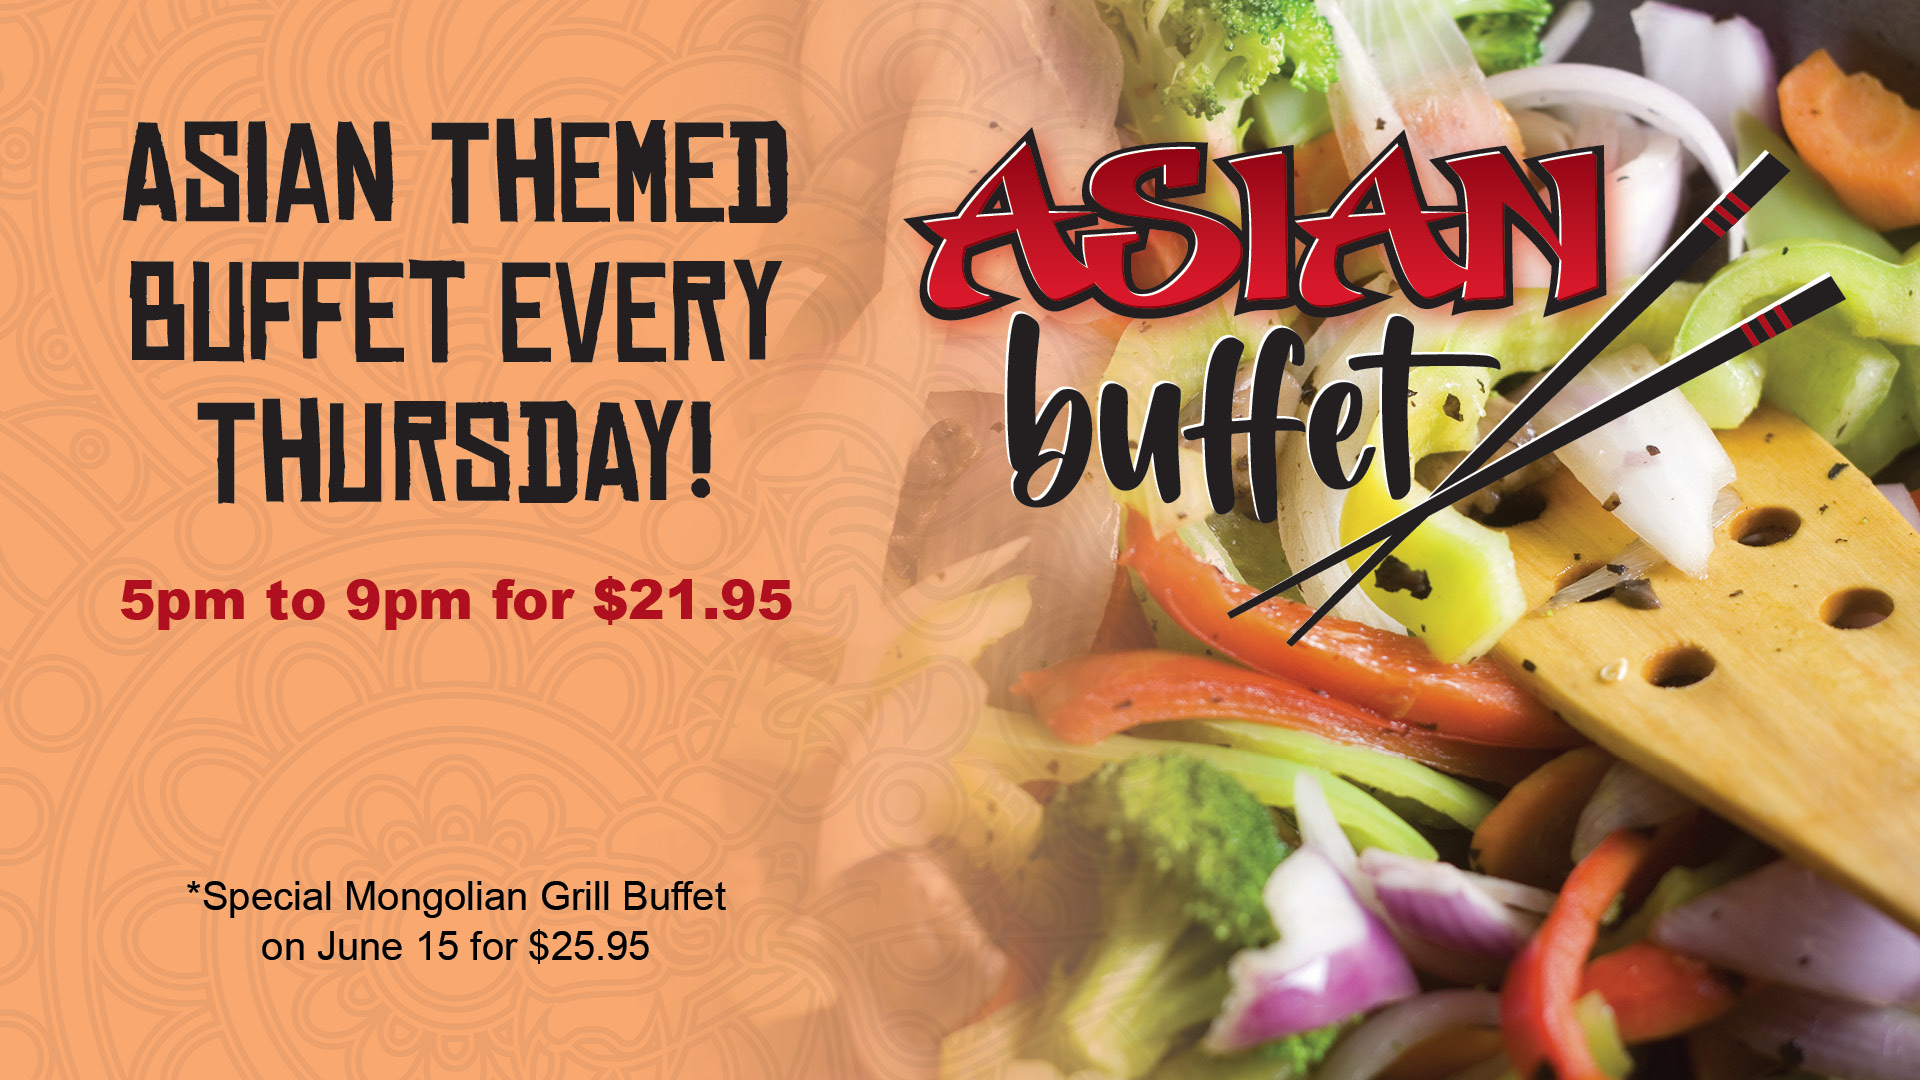 Asian themed buffet every Thursday! 5pm to 9pm for $21.95. Special Mongolian Grill Buffet on June 15 for $25.95.